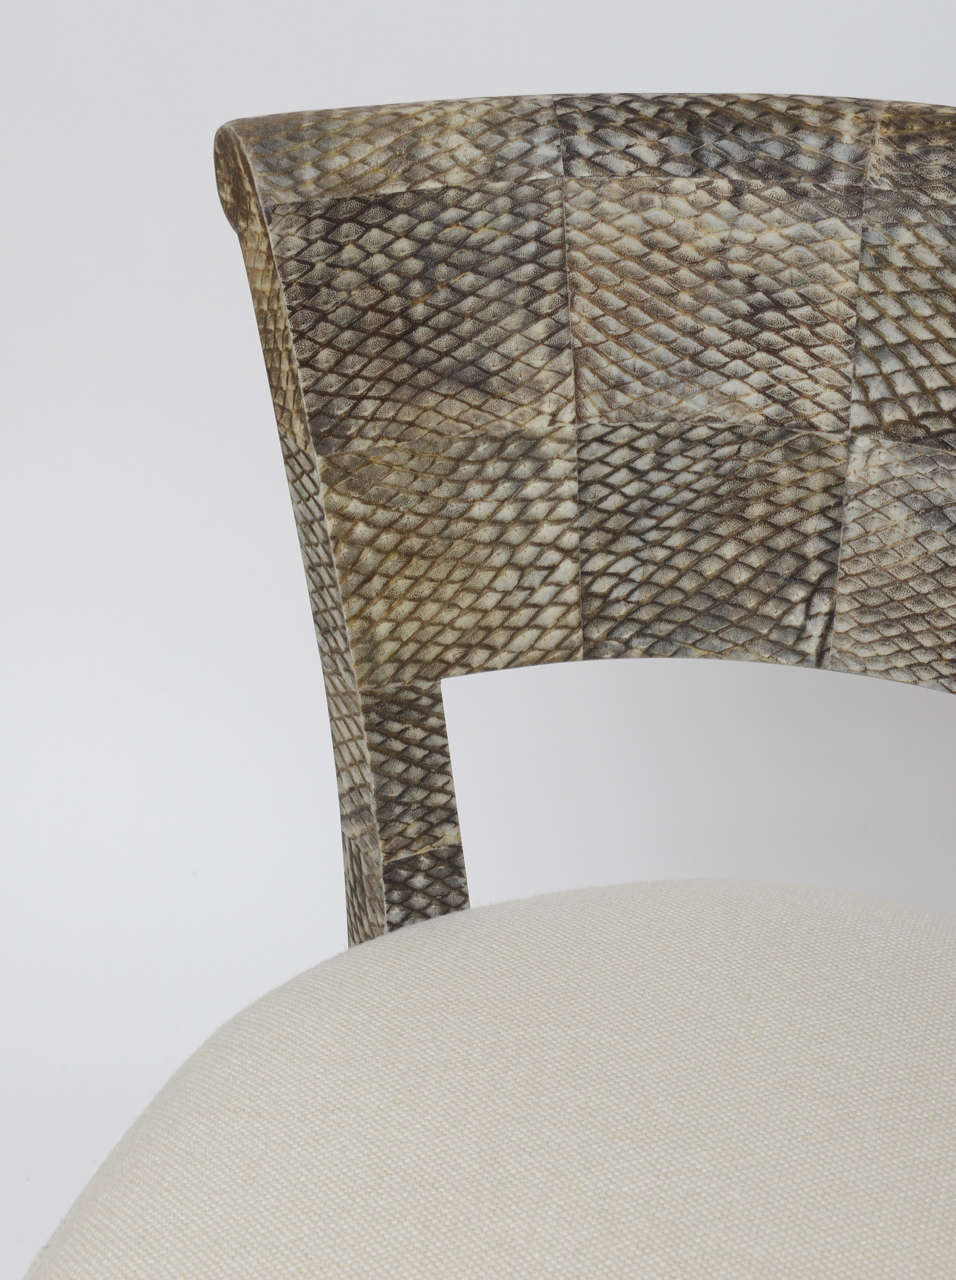 Organic Modern Matte Fishskin Chairs with Linen Upholstery For Sale